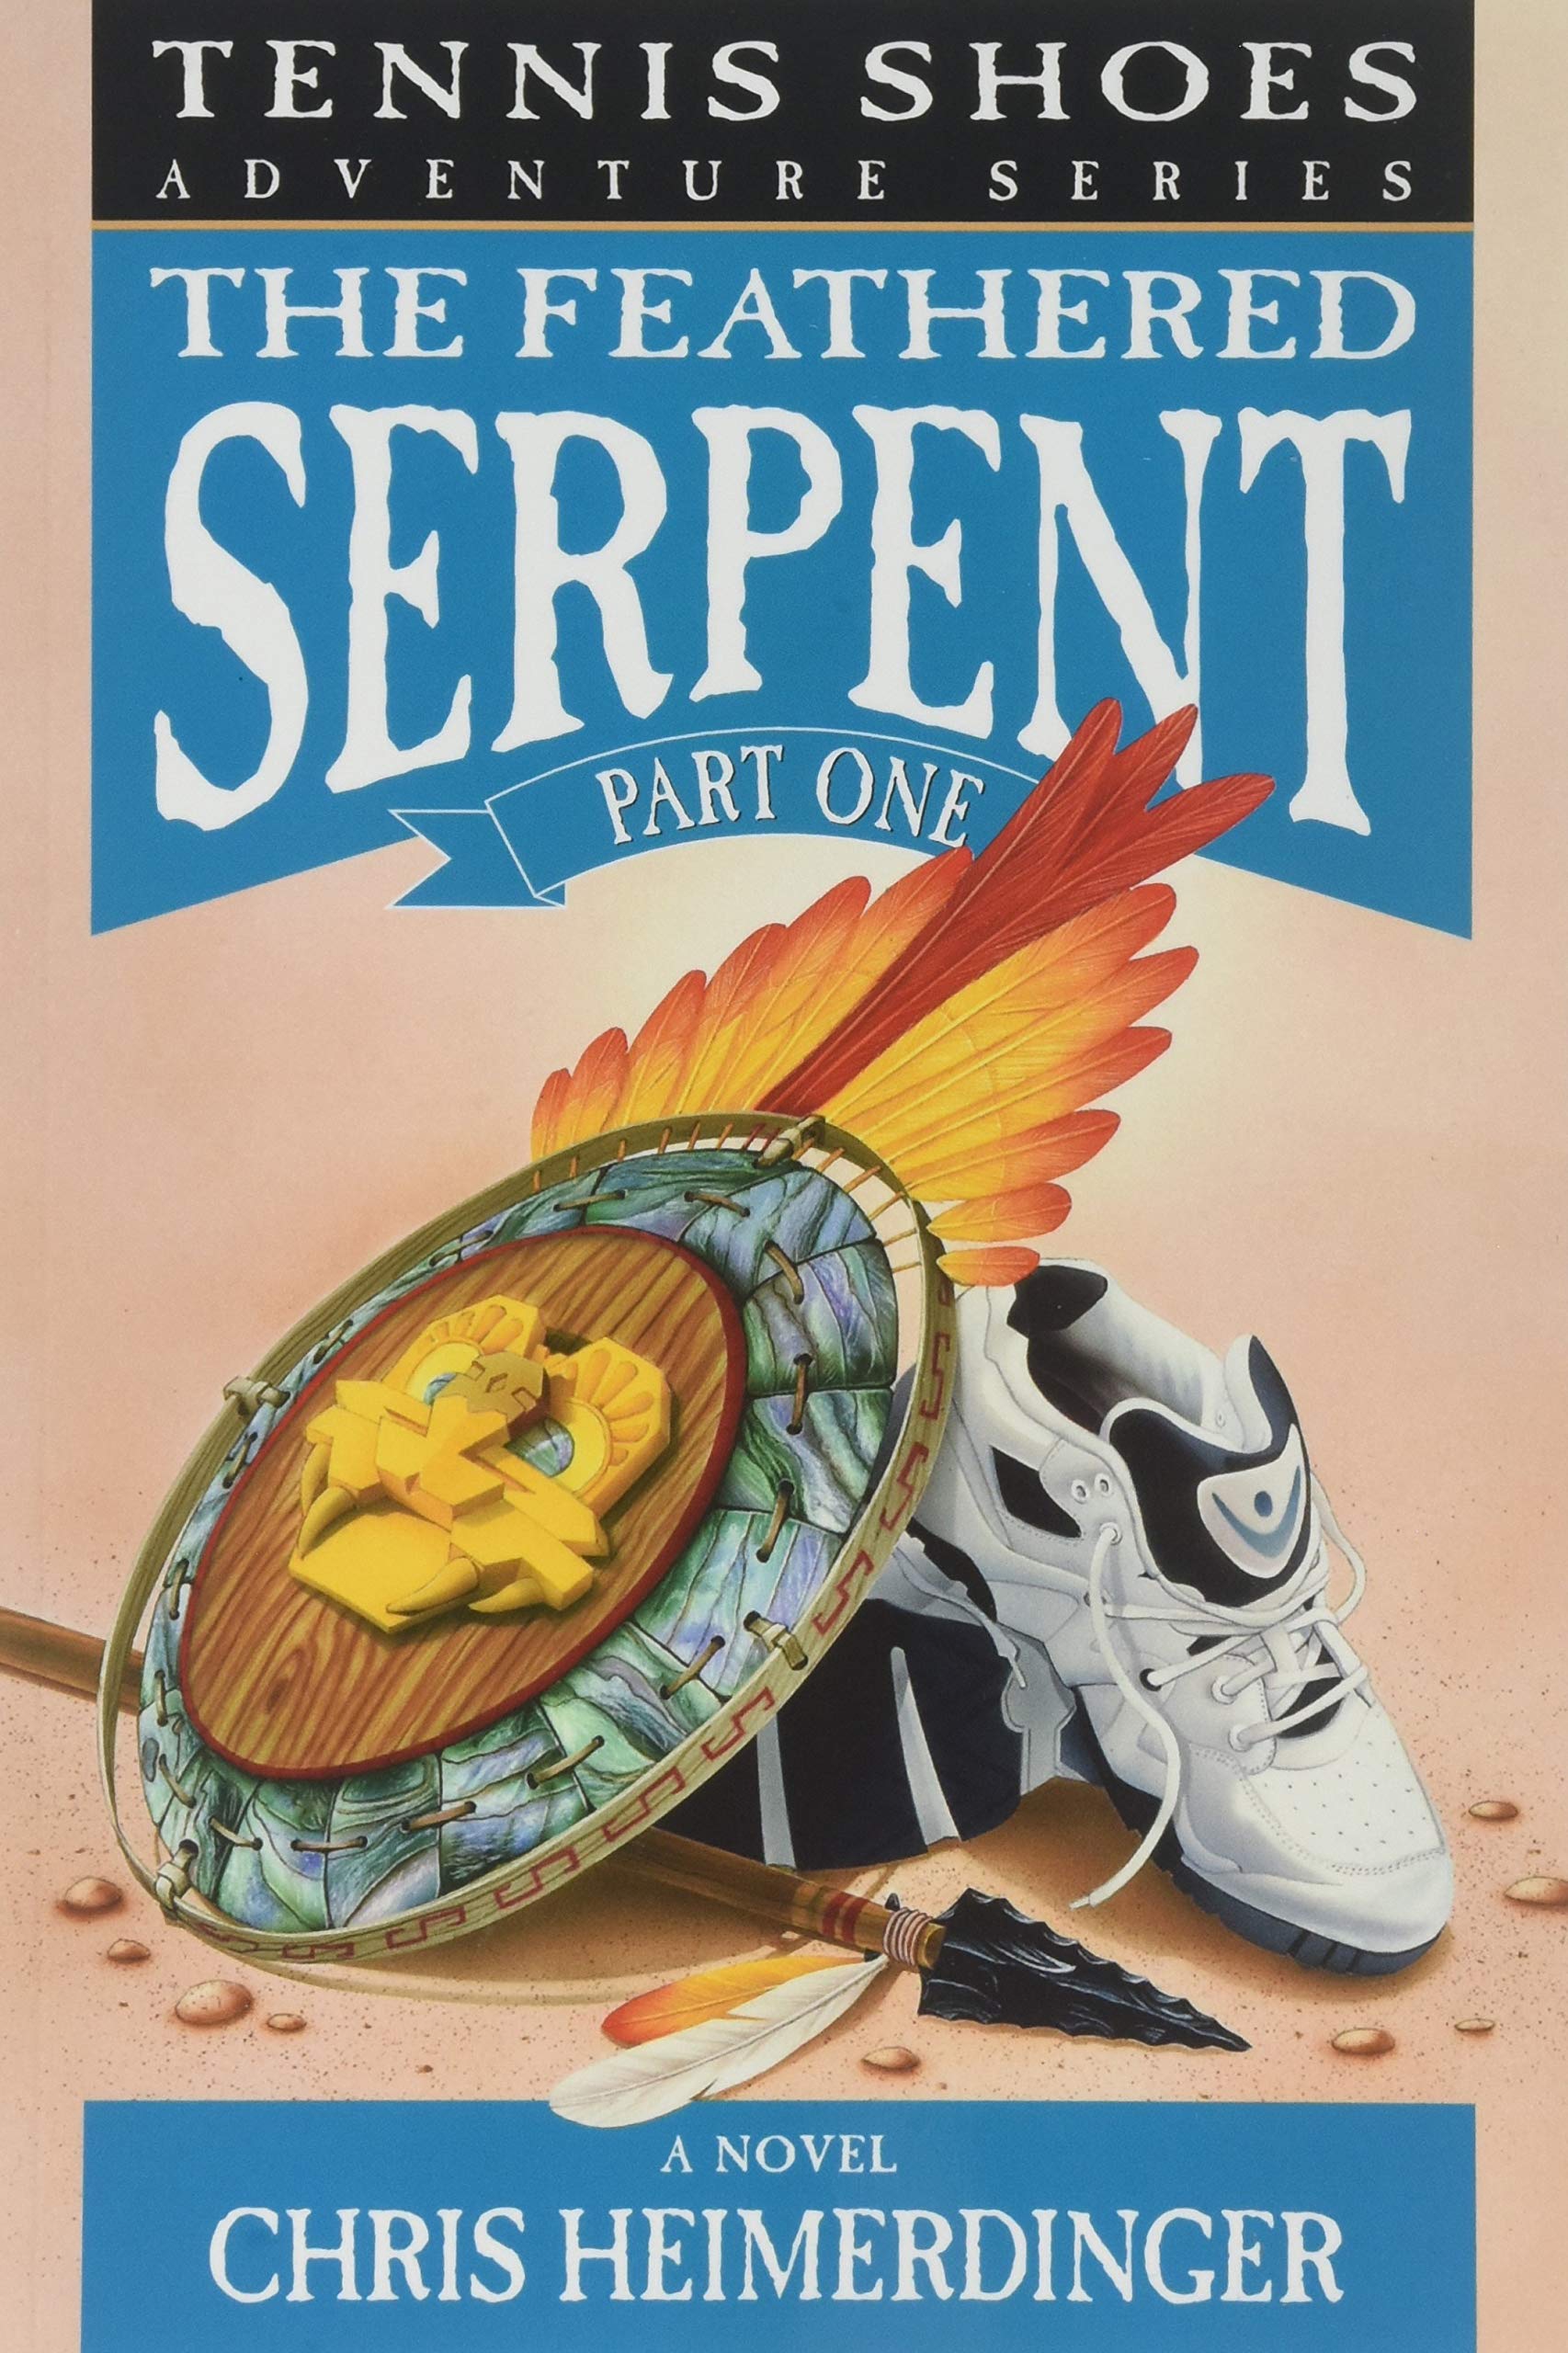 Book Cover Tennis Shoes: Feathered Serpent Book 1